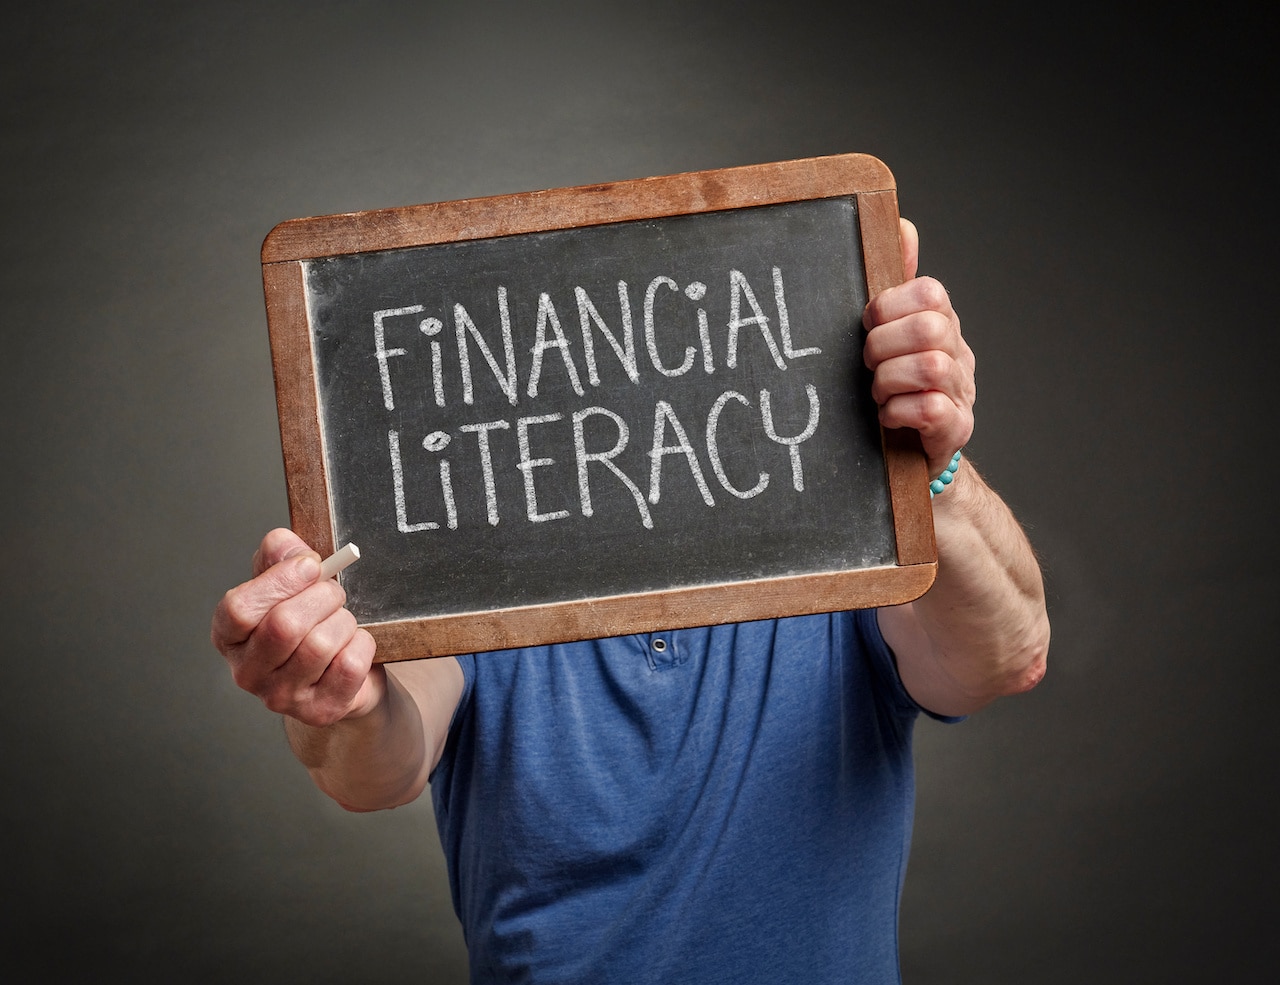 Why financial literacy